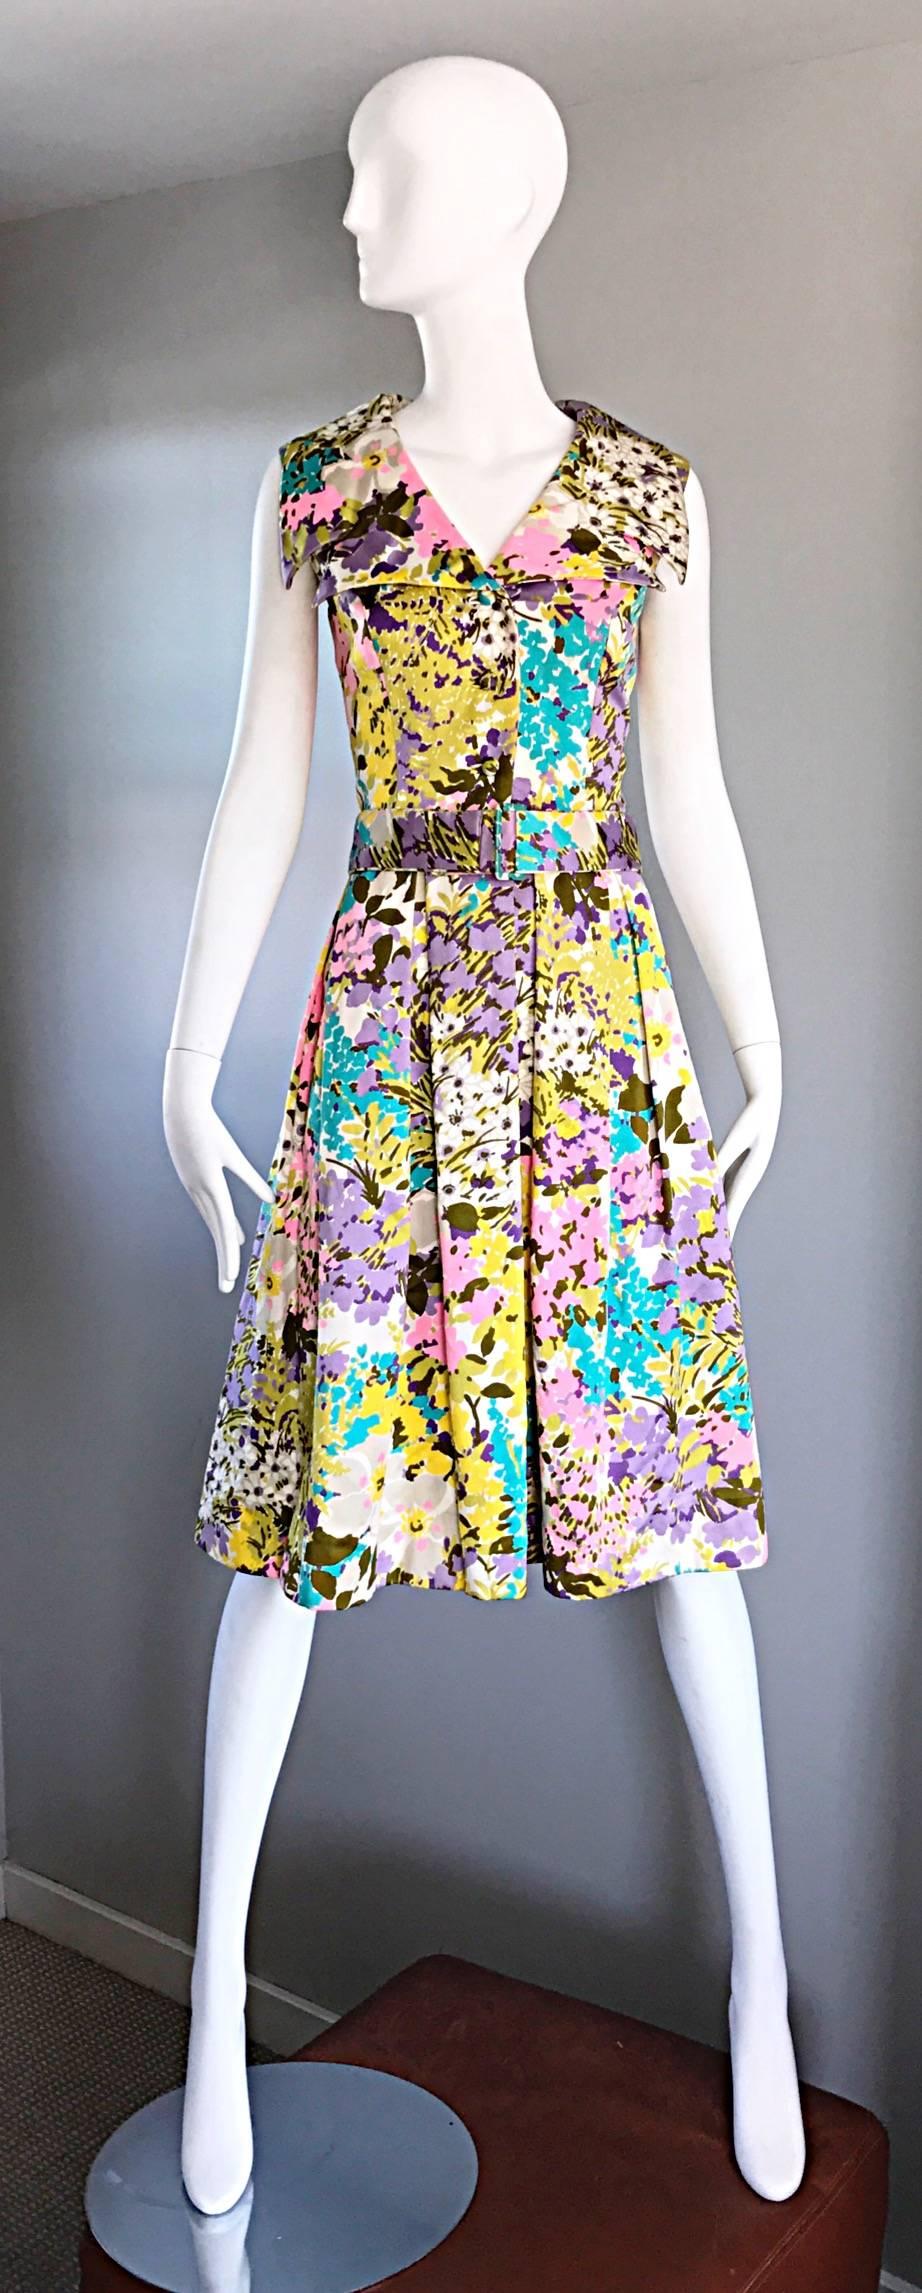 Incredible vintage late 1960s TORI RICHARD for LIBERTY HOUSE A - Line belted shirt dress! Features a beautiful Allover floral print in vibrant pastels. Large oversized Avant Garde collar. Fitted bodice with a flared skirt. Detachable belt in the